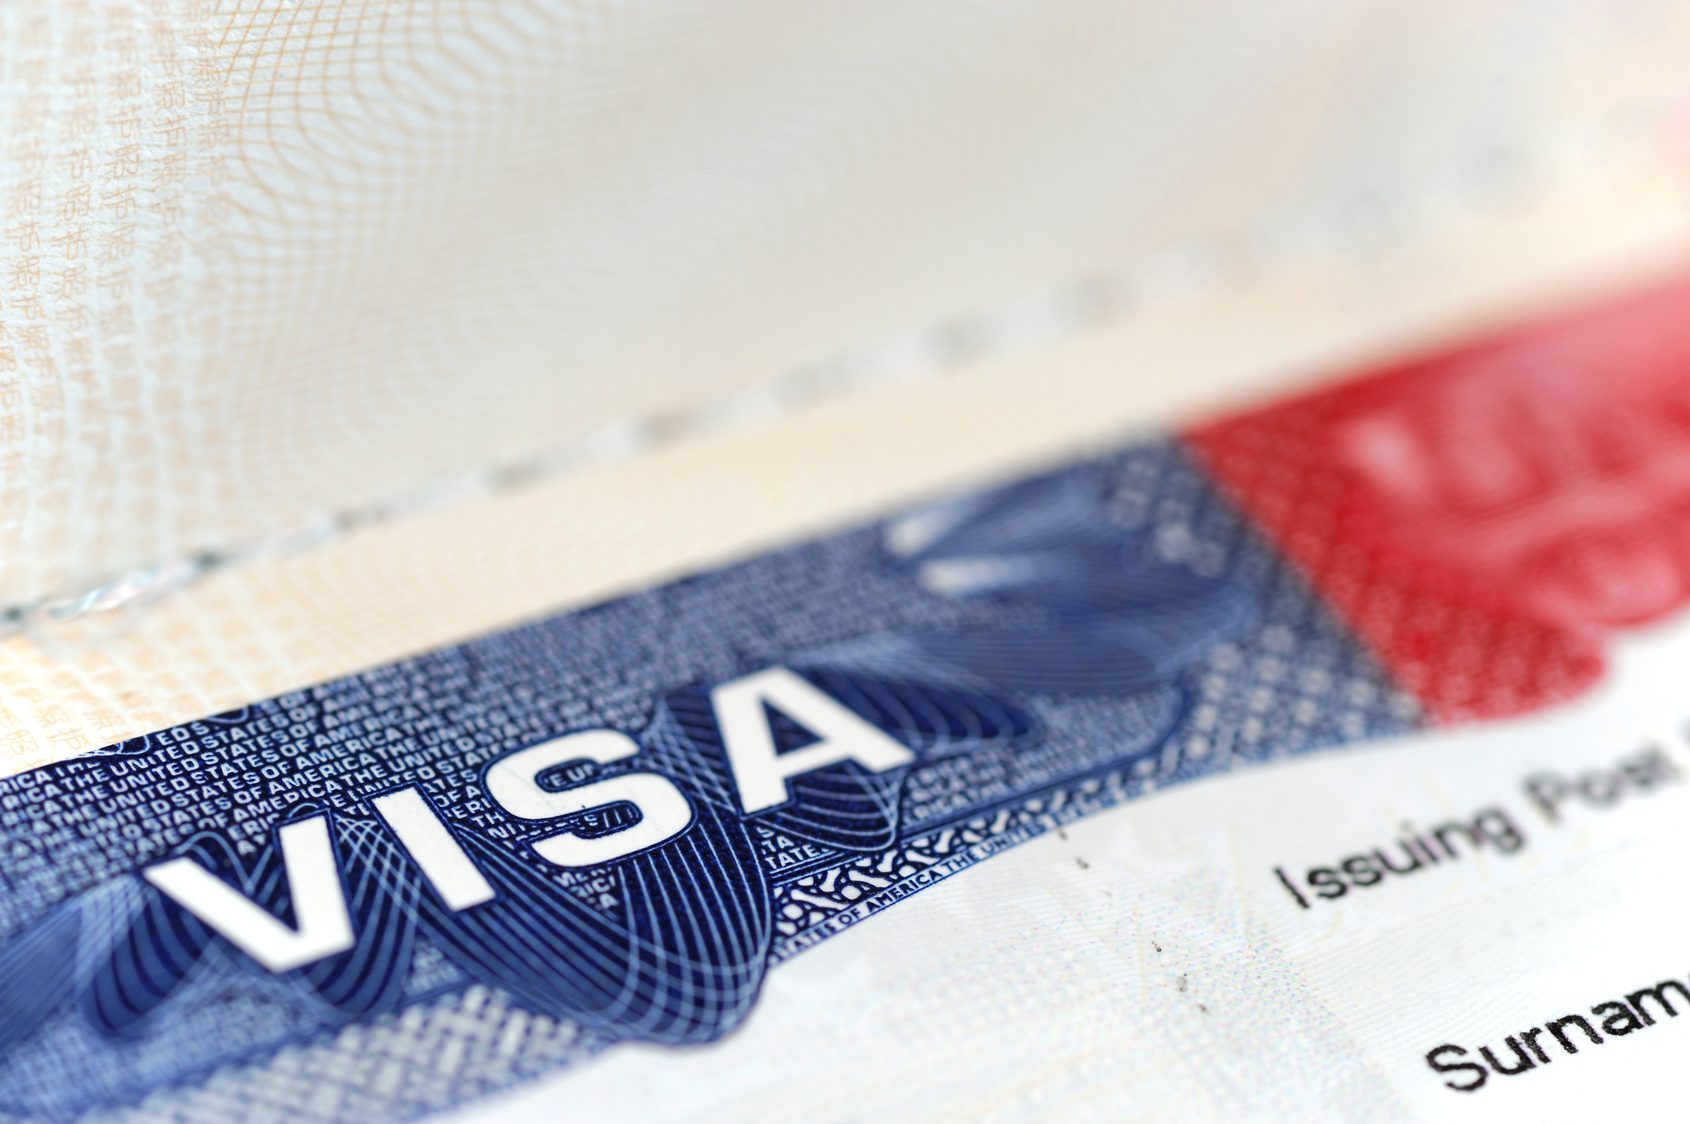 DHS Adds Countries to the Visa Waiver Program Travel Restriction